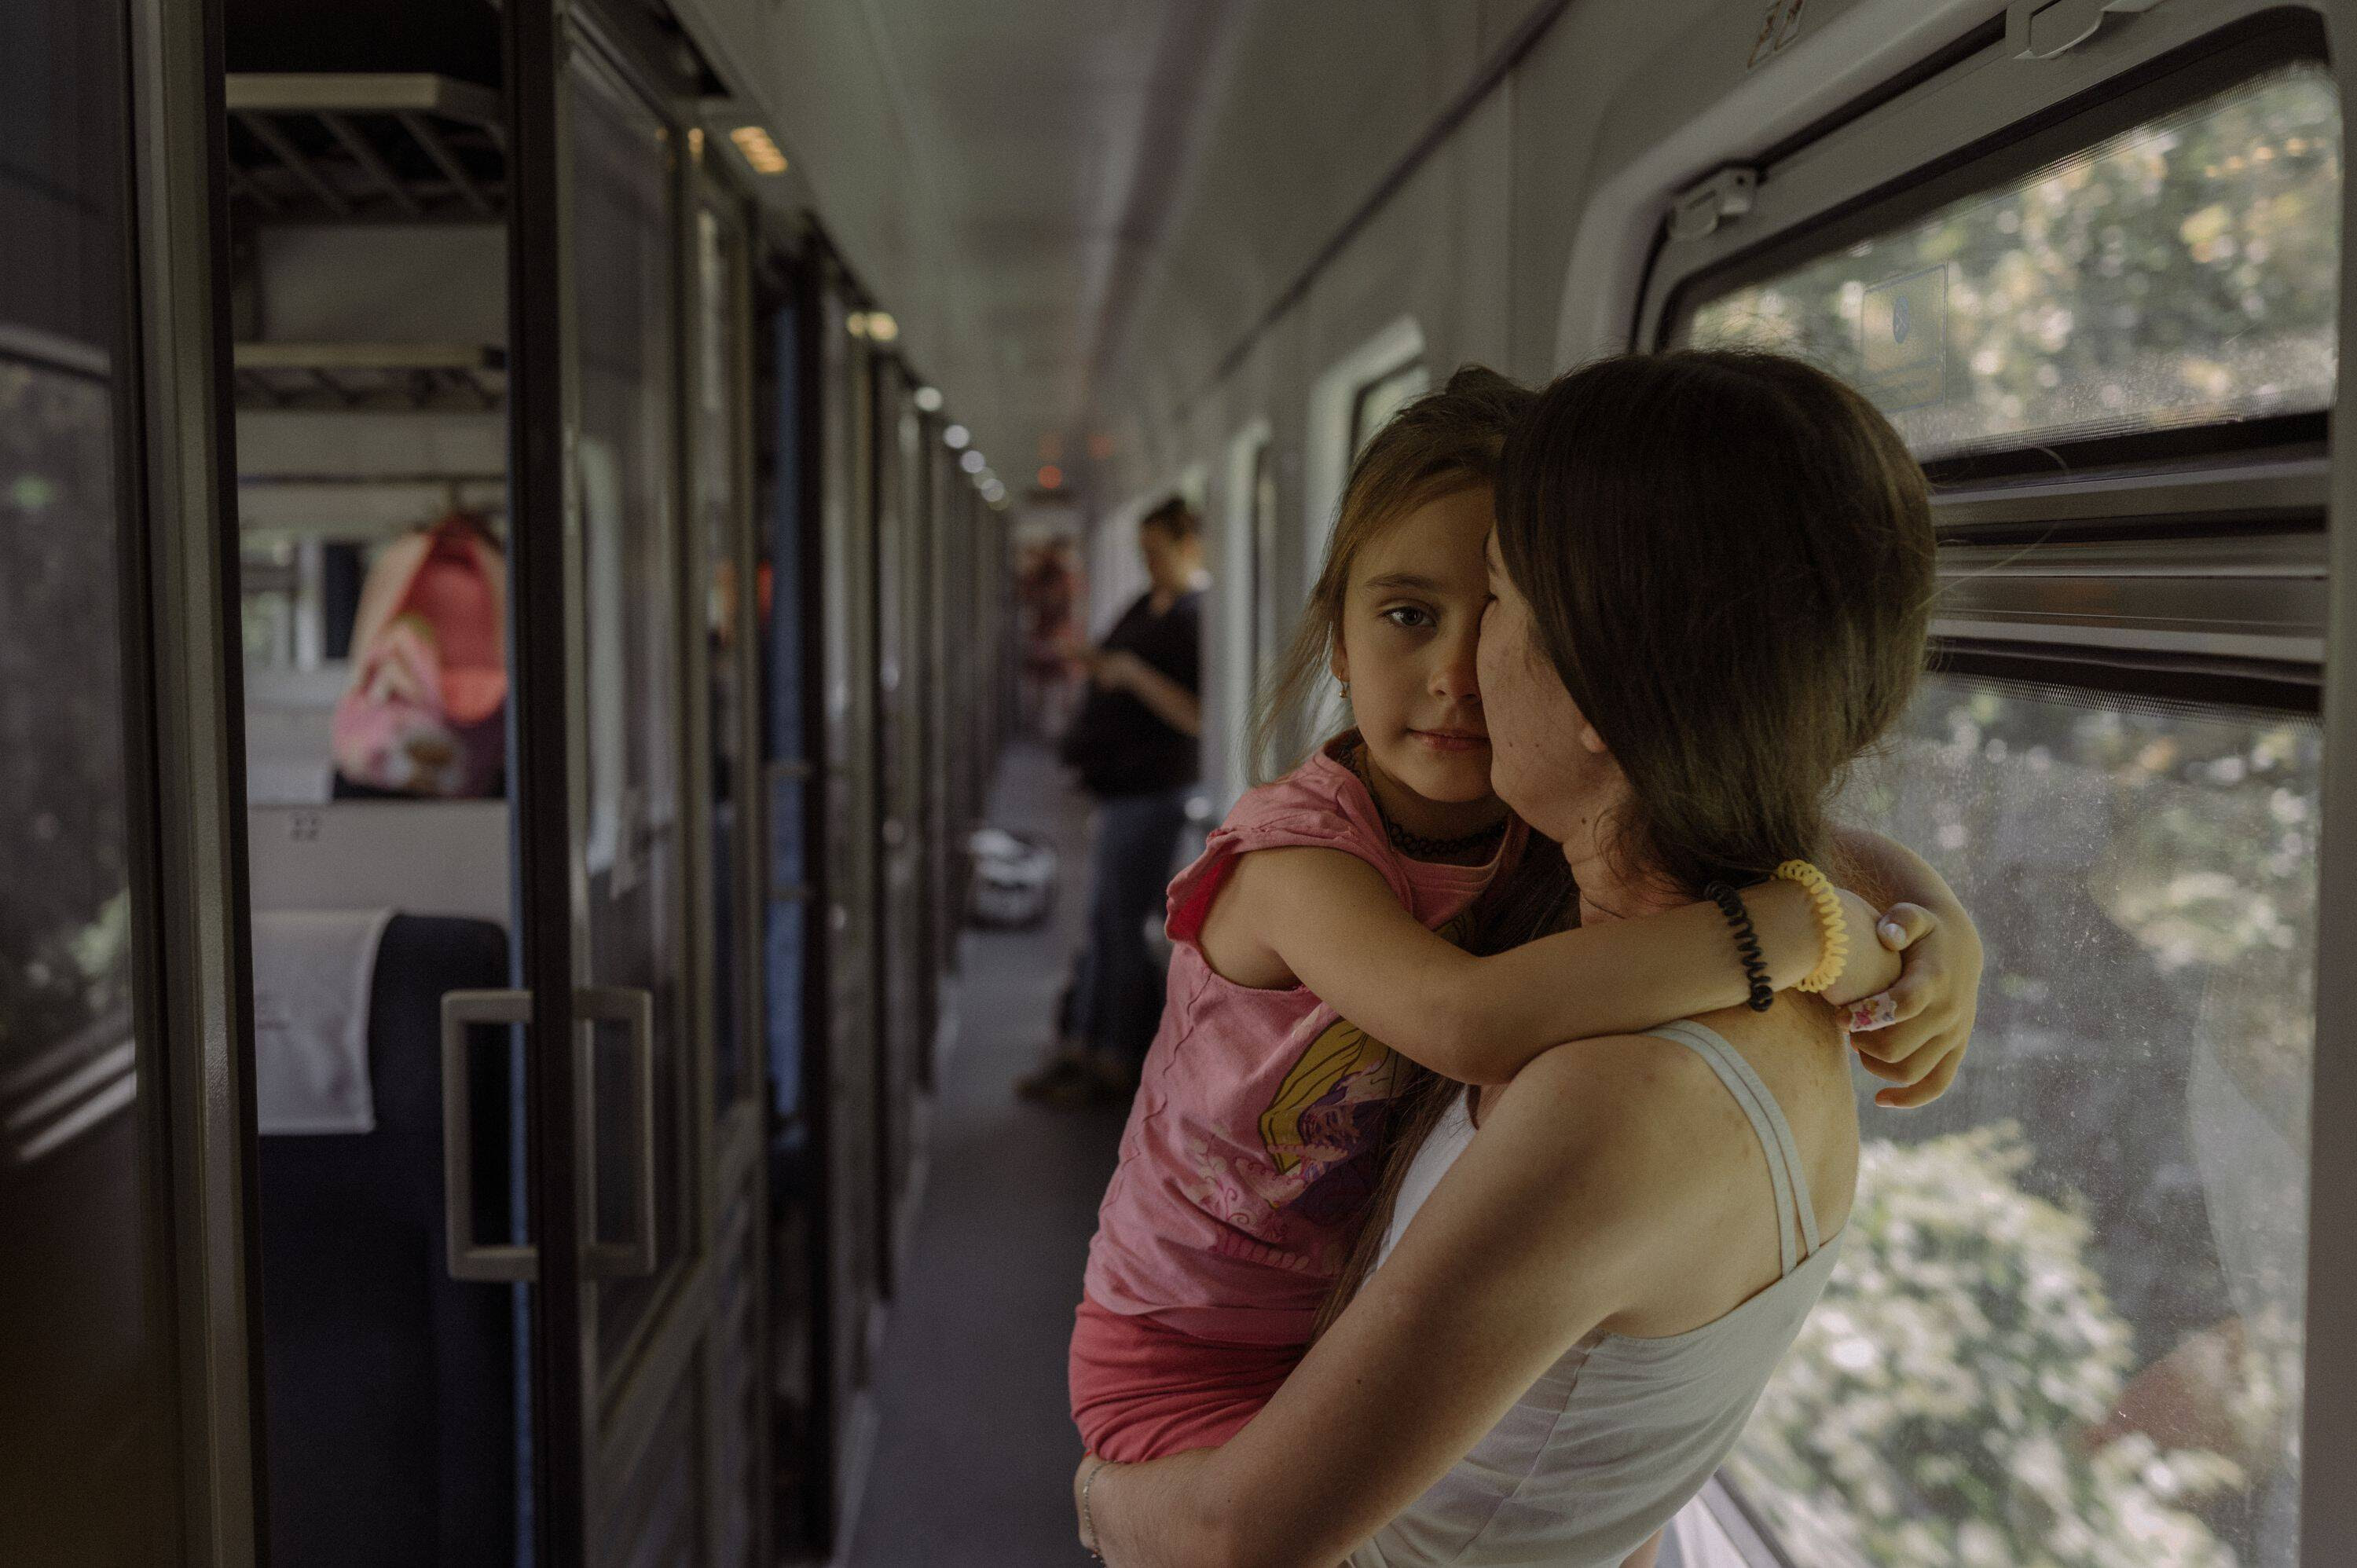 Kateryna Dobrovolska, 27 — along with her daughter Liliia, 5 — are going to Odessa to visit her husband and Liliiia's dad, who could not leave Ukraine with them because he is subject to military conscription. (Aliona Kardash for The Washington Post)